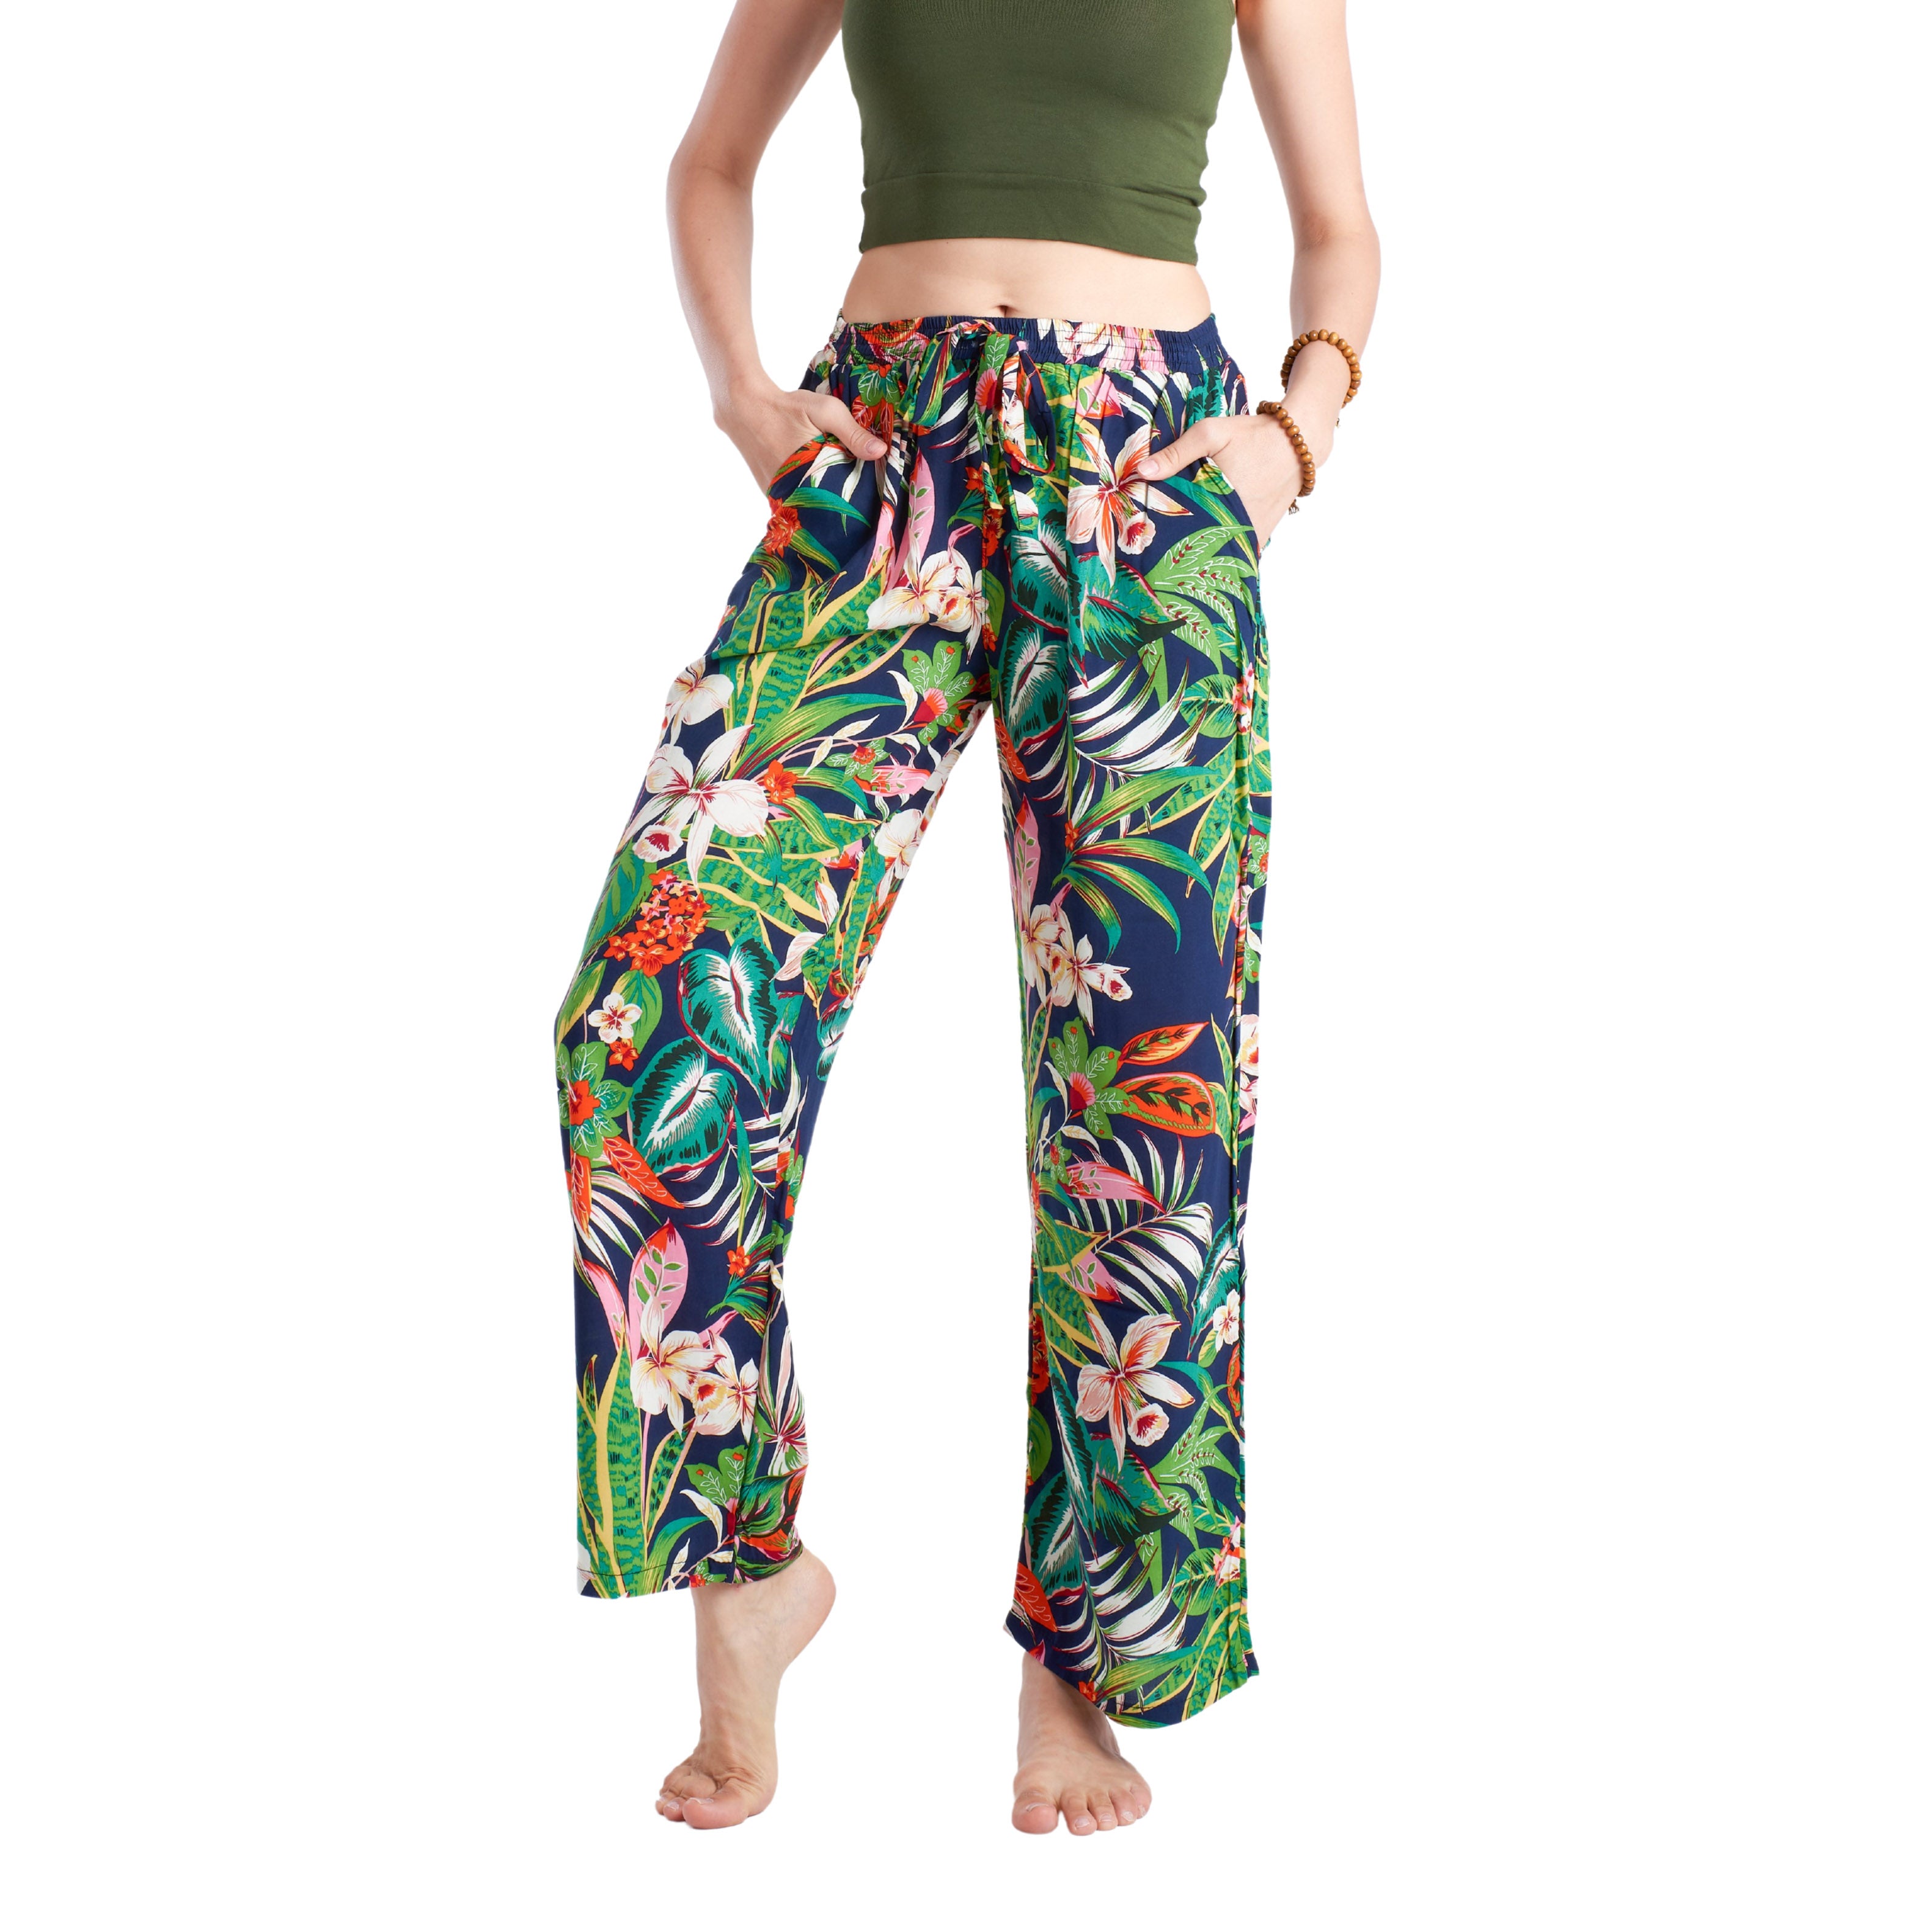 SELVA PANTS Elepanta Casual Pants - Buy Today Elephant Pants Jewelry And Bohemian Clothes Handmade In Thailand Help To Save The Elephants FairTrade And Vegan